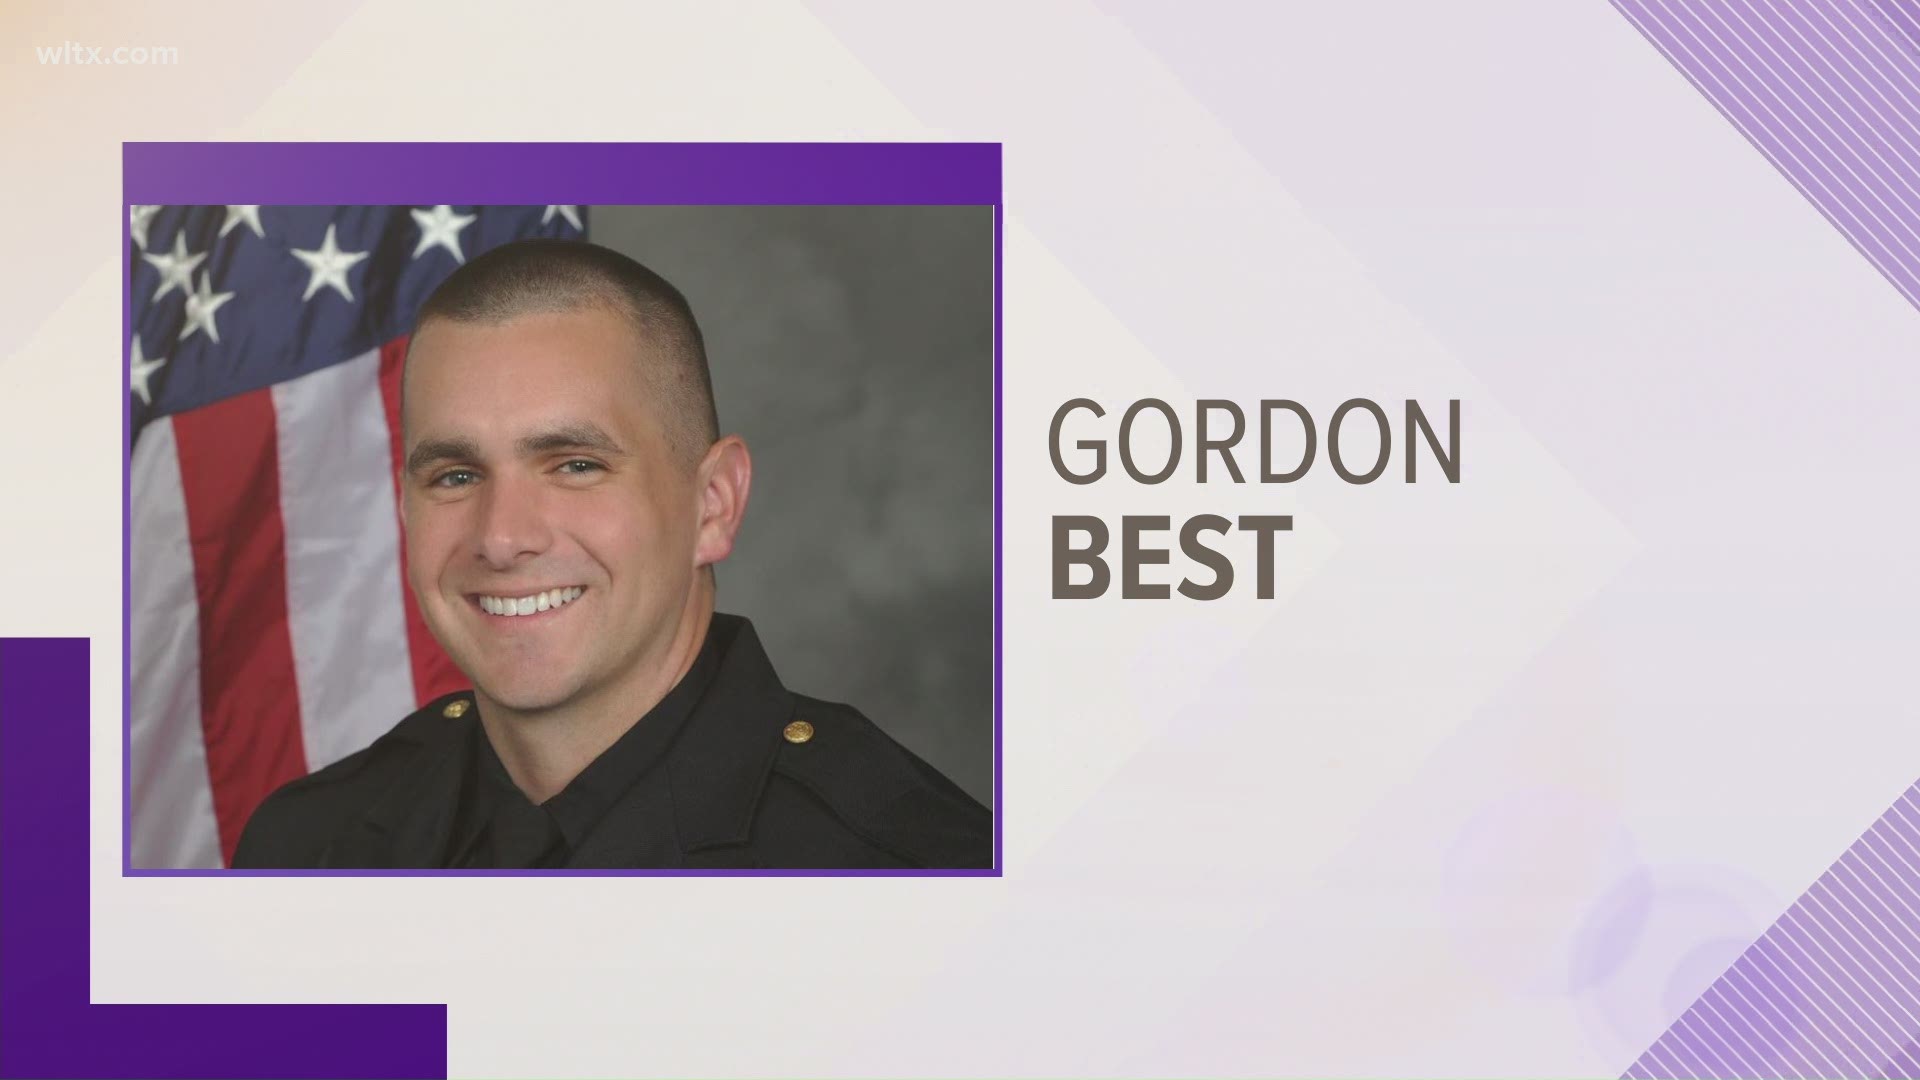 North Myrtle Beach Police Officer Sgt. Gordon Best was responding to a call for service early on New Year's morning when he died.